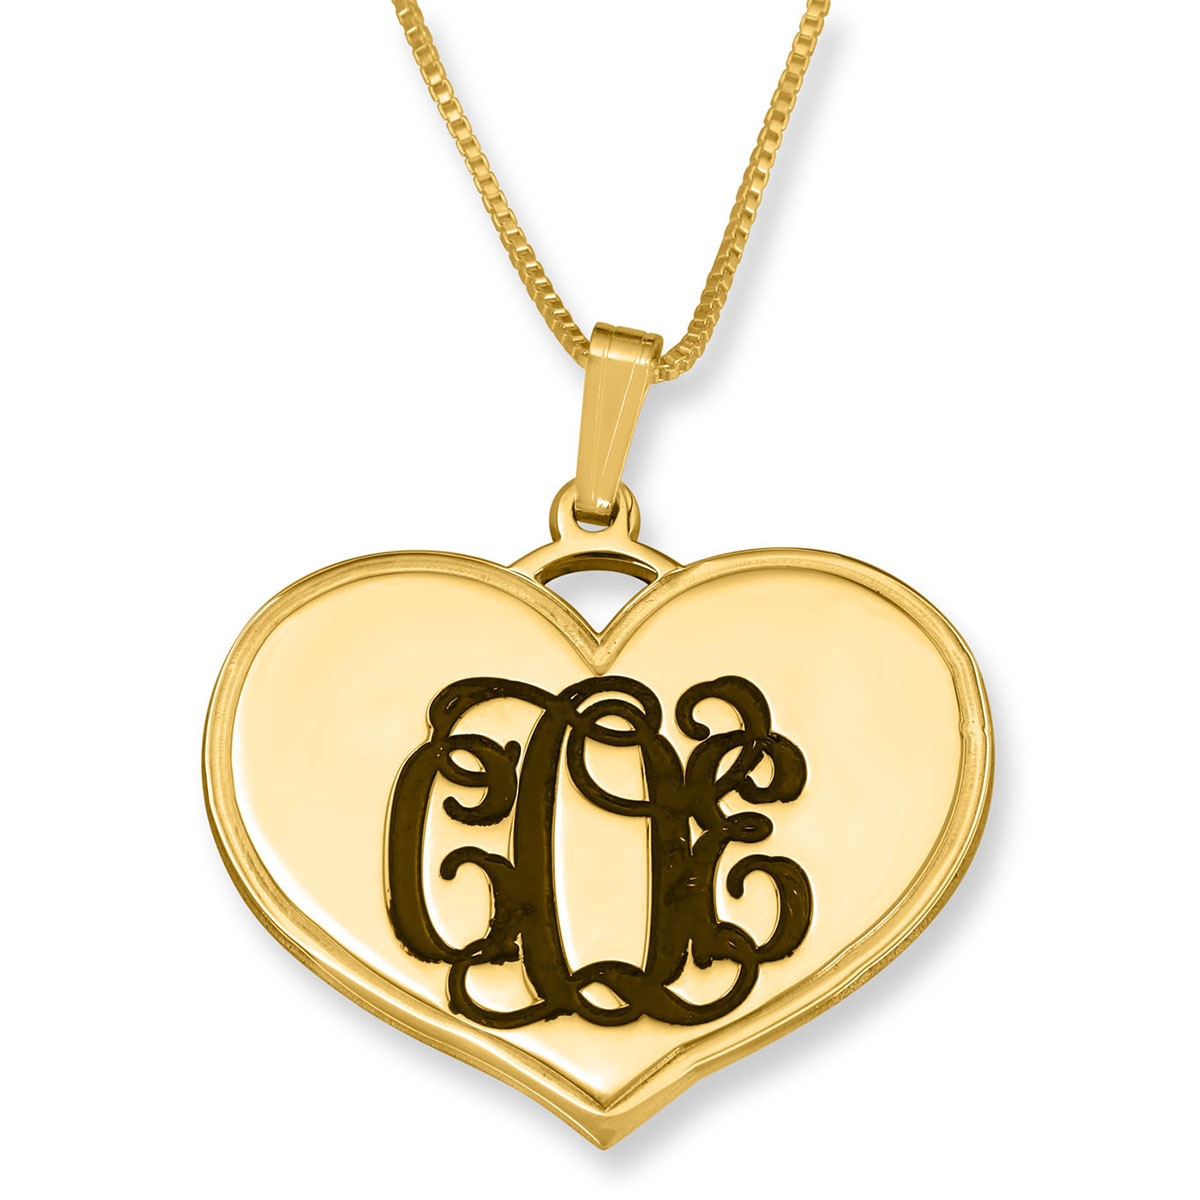 24k Gold Plated Engraved Monogram Three Initials Heart Necklace - 1